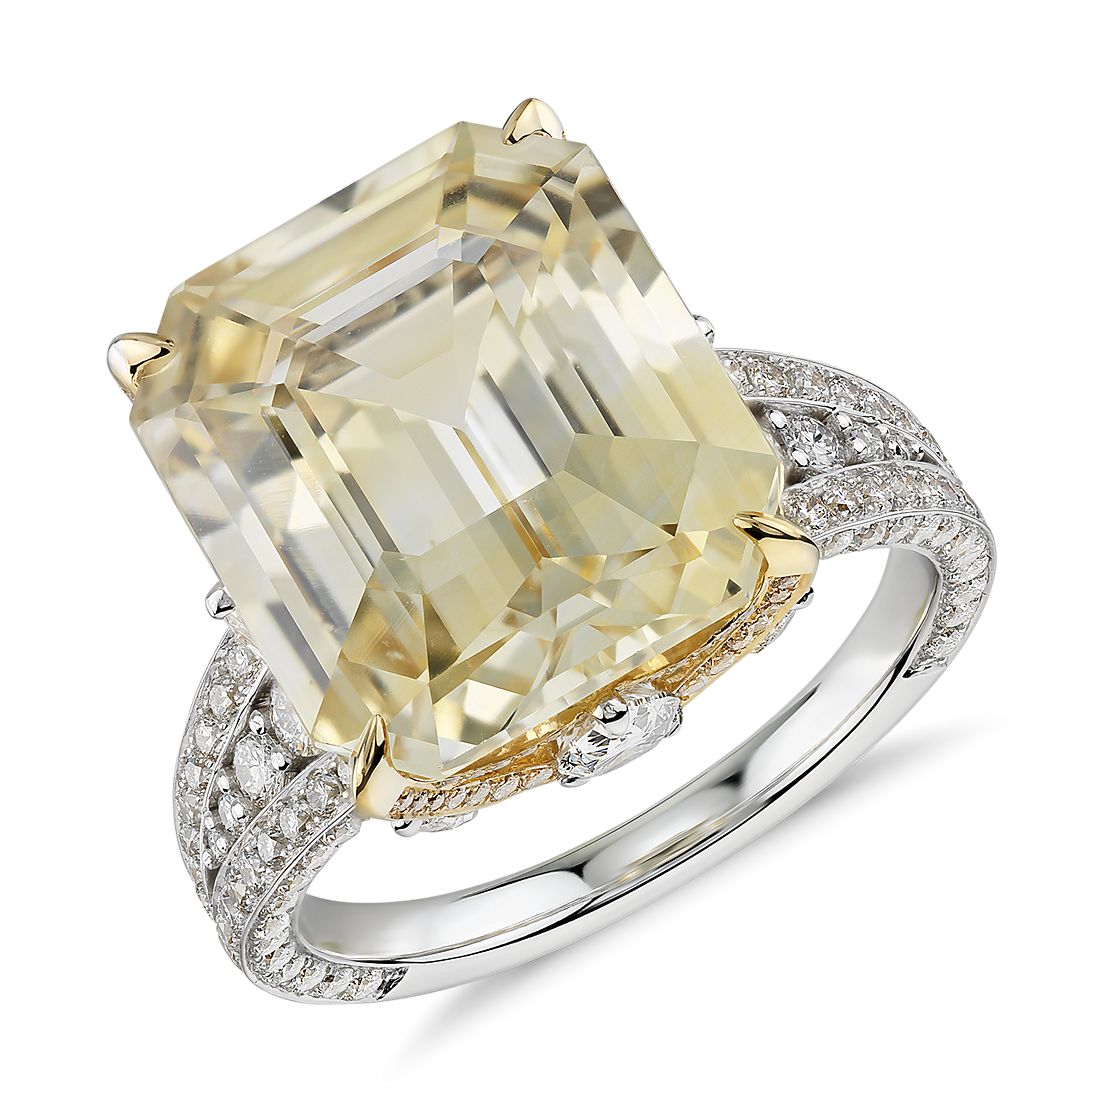 Emerald-Cut Yellow Sapphire and Diamond Ring in 18k White and Yellow Gold (12.03 ct. tw. centre)